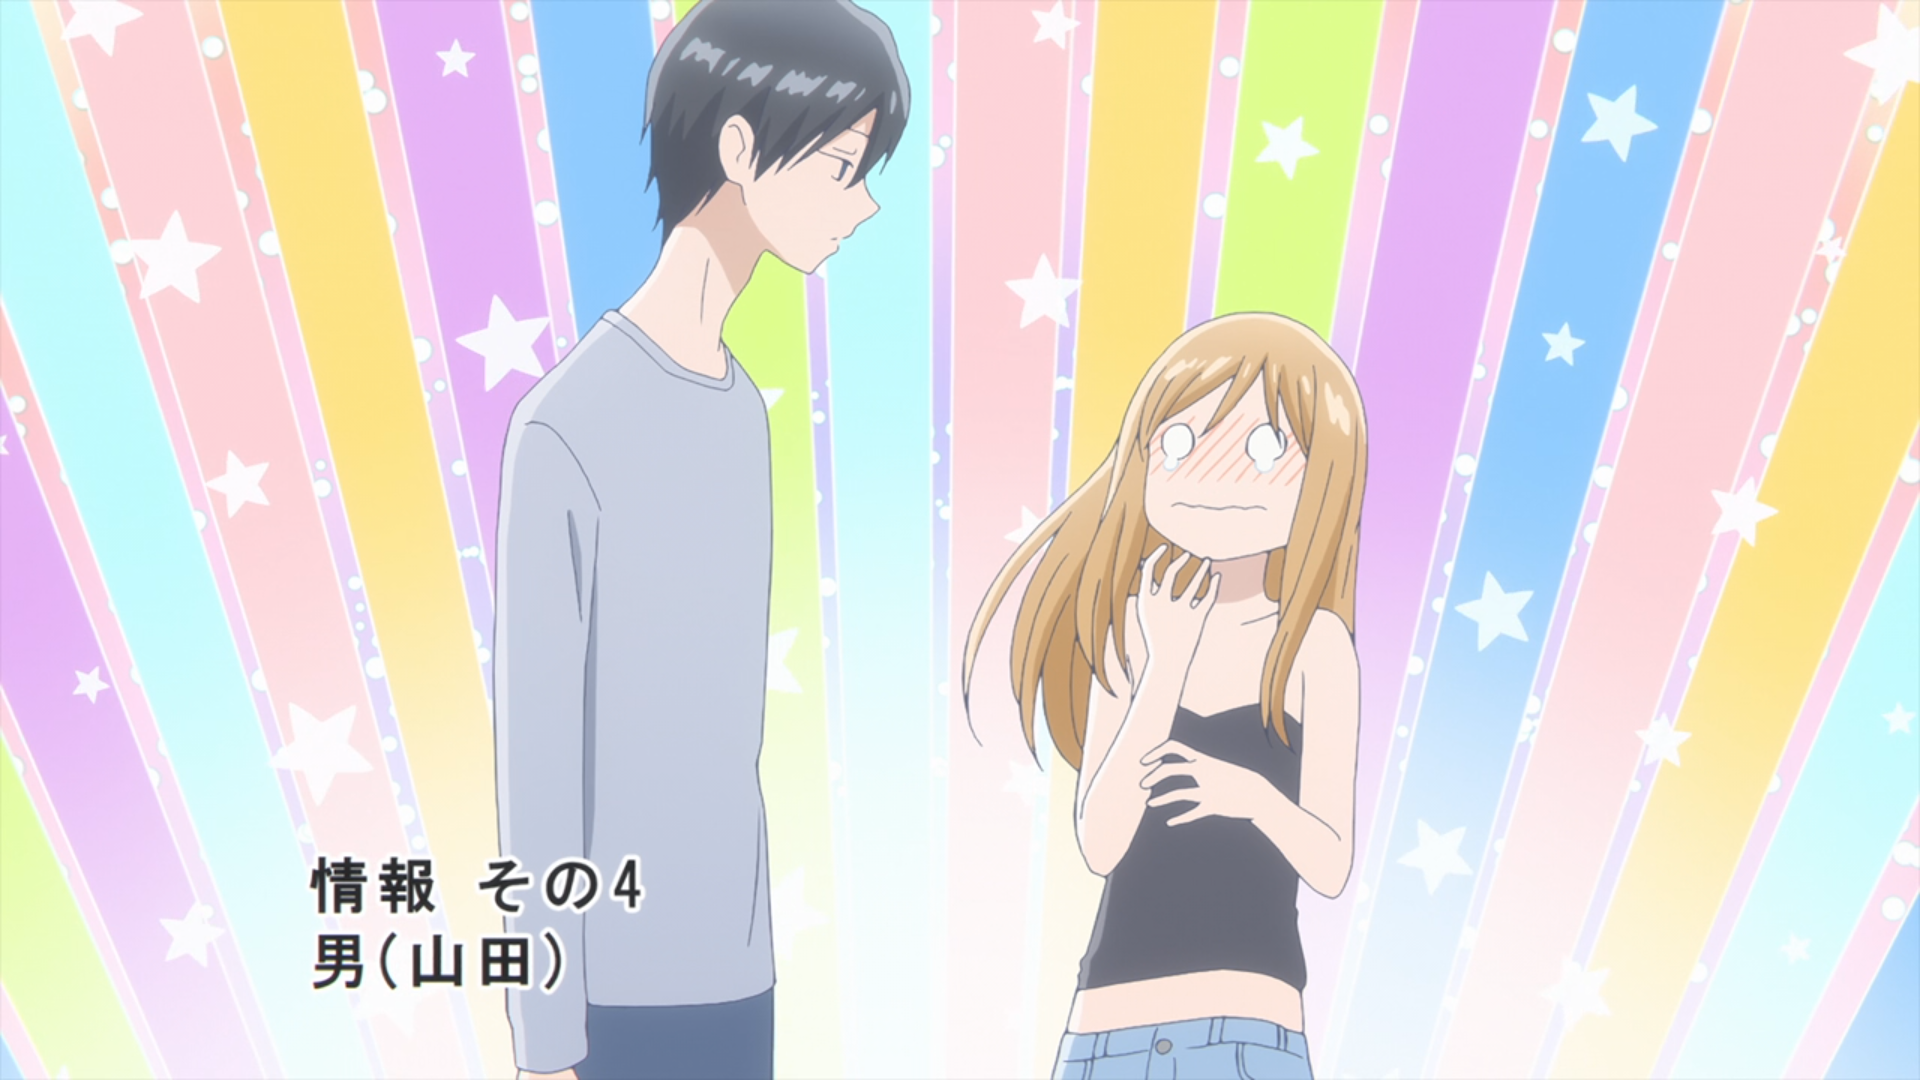 Stream My Love Story with Yamada-kun at Lv999 OP (Gradation by